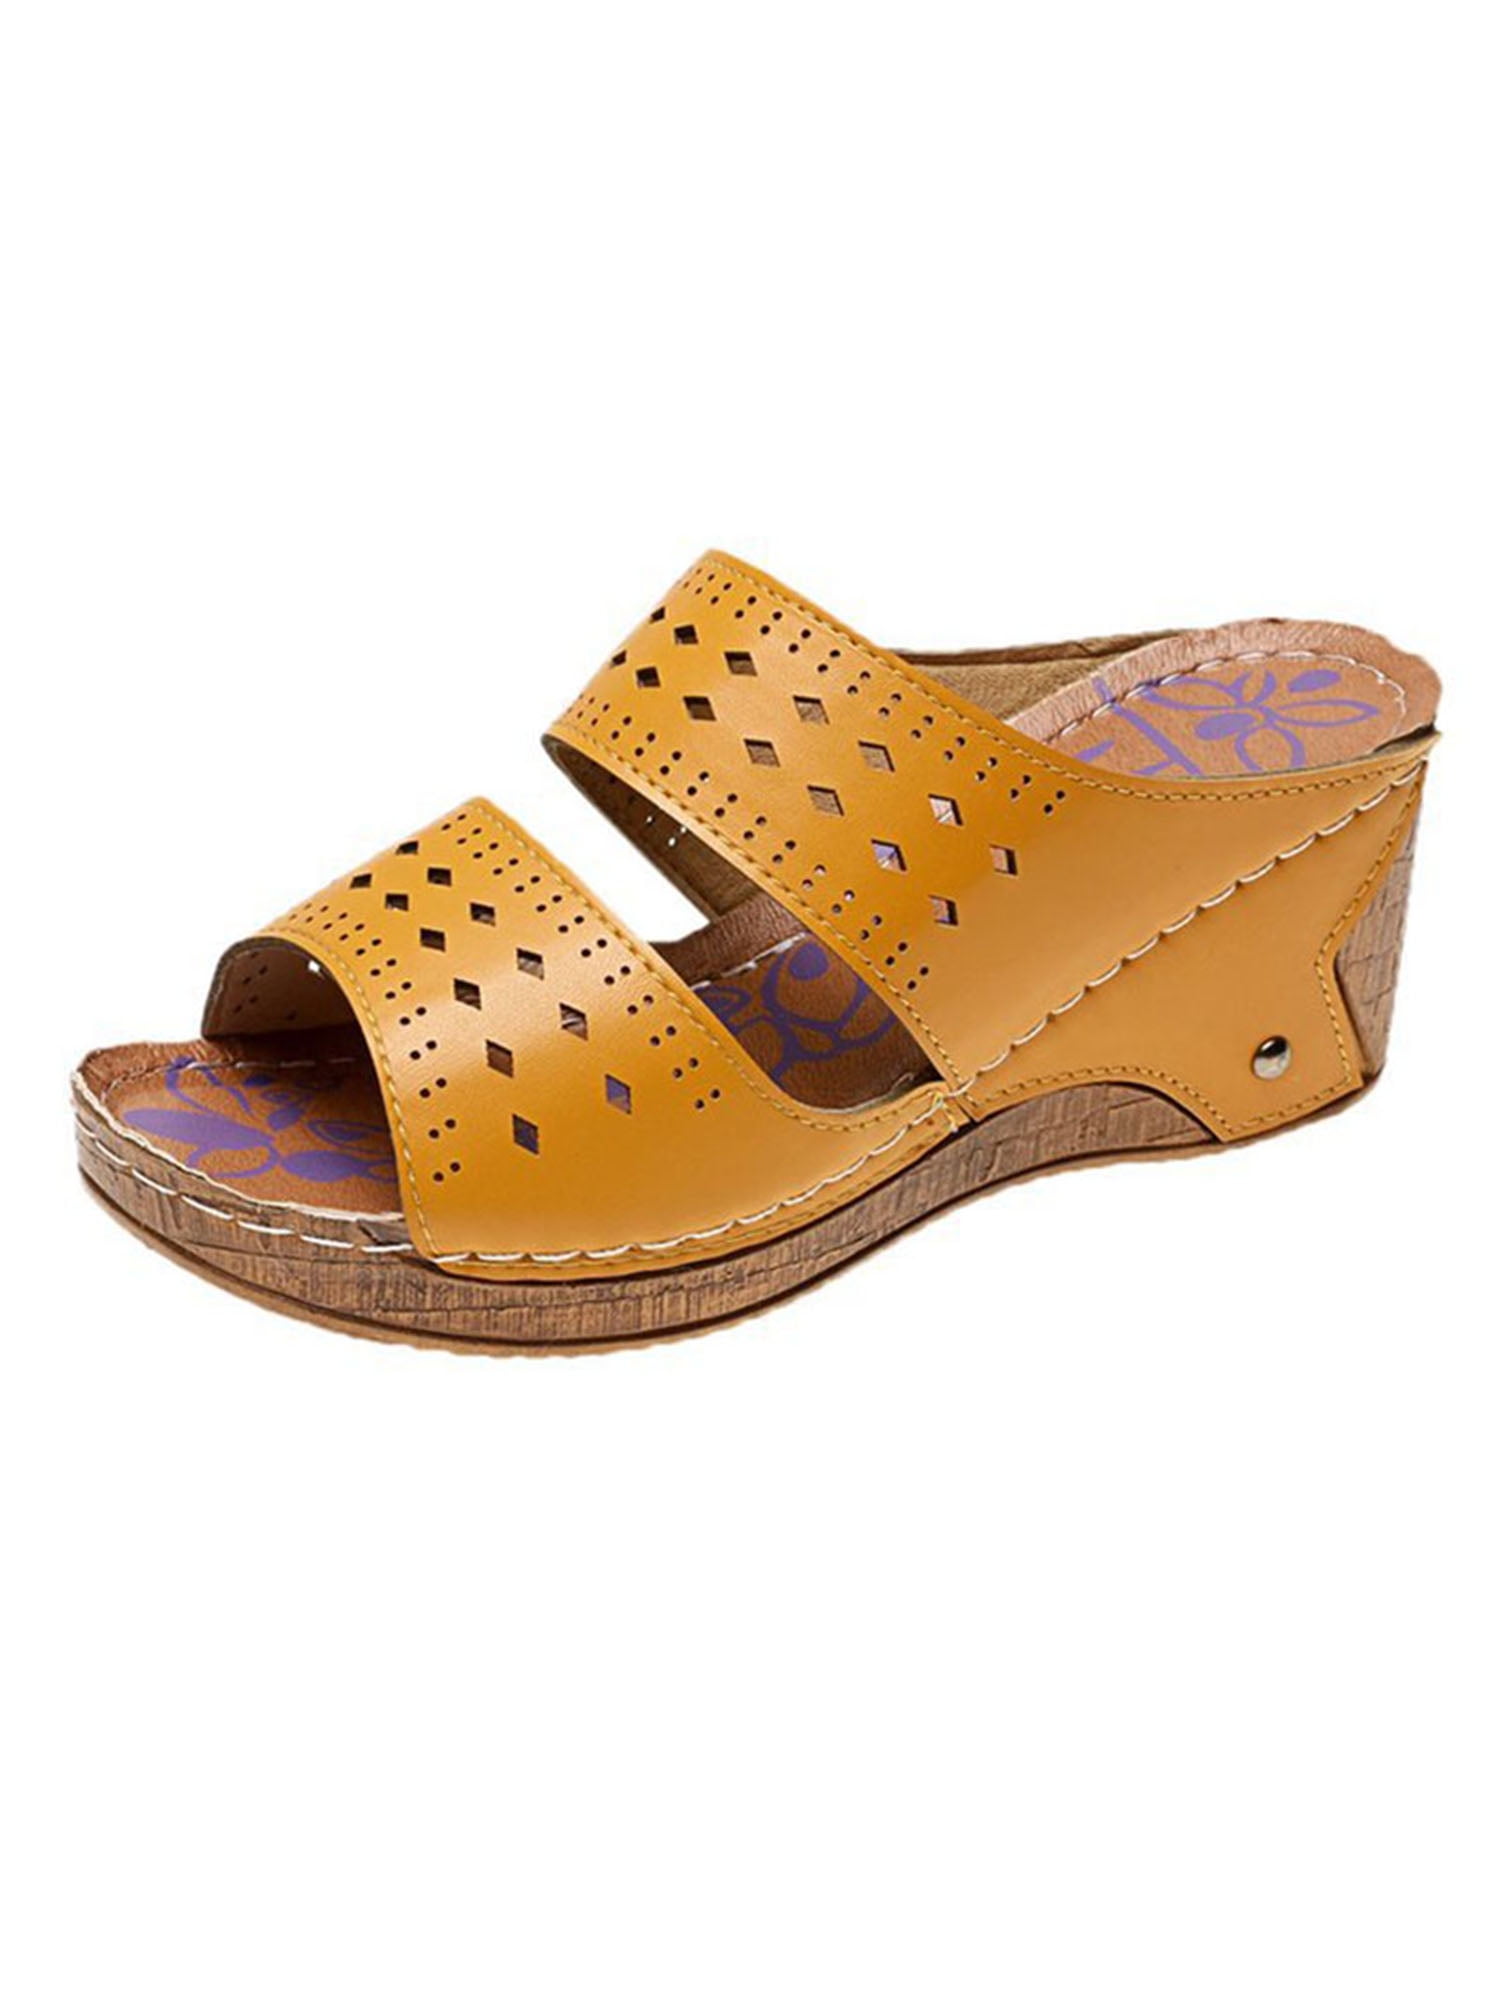 Details about   Women's Summer Slippers Slip On Wedge Beach Sandals Open Toe Faux Leather Shoes